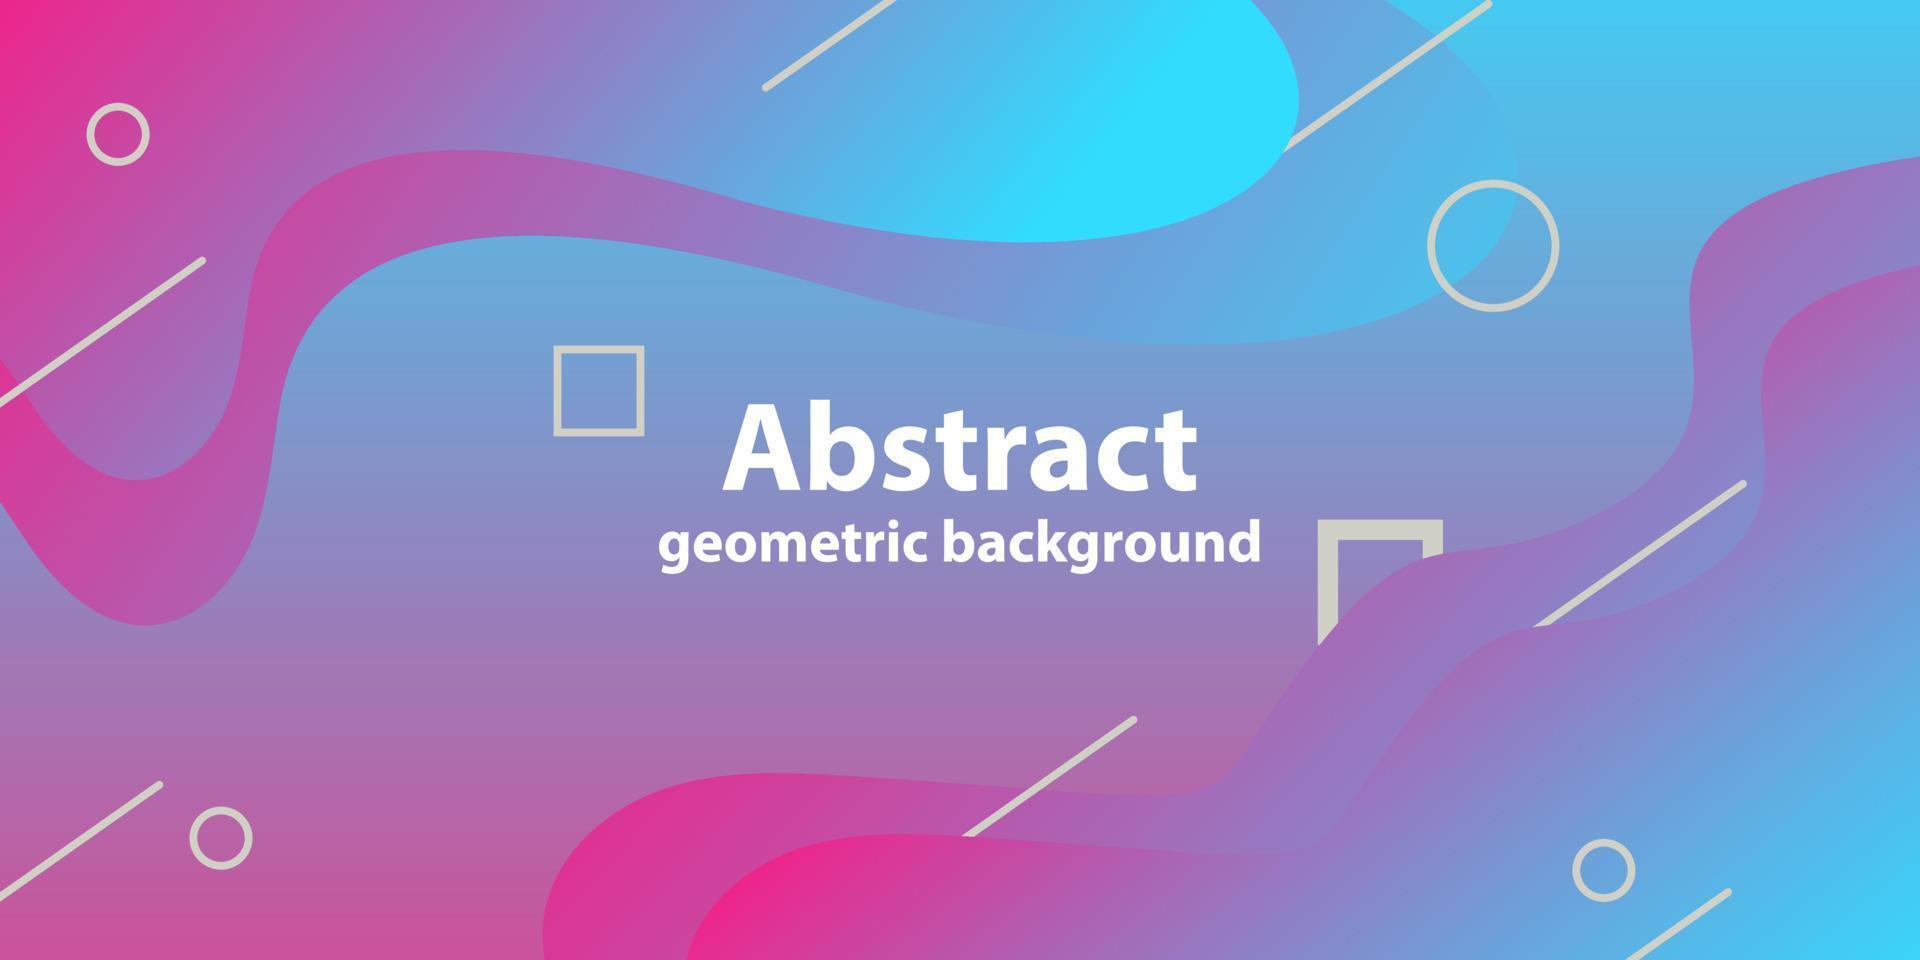 Abstract modern graphic element. Dynamical colored forms and waves. Gradient abstract banner with flowing liquid shapes. Template for the design of a website landing page or background. vector